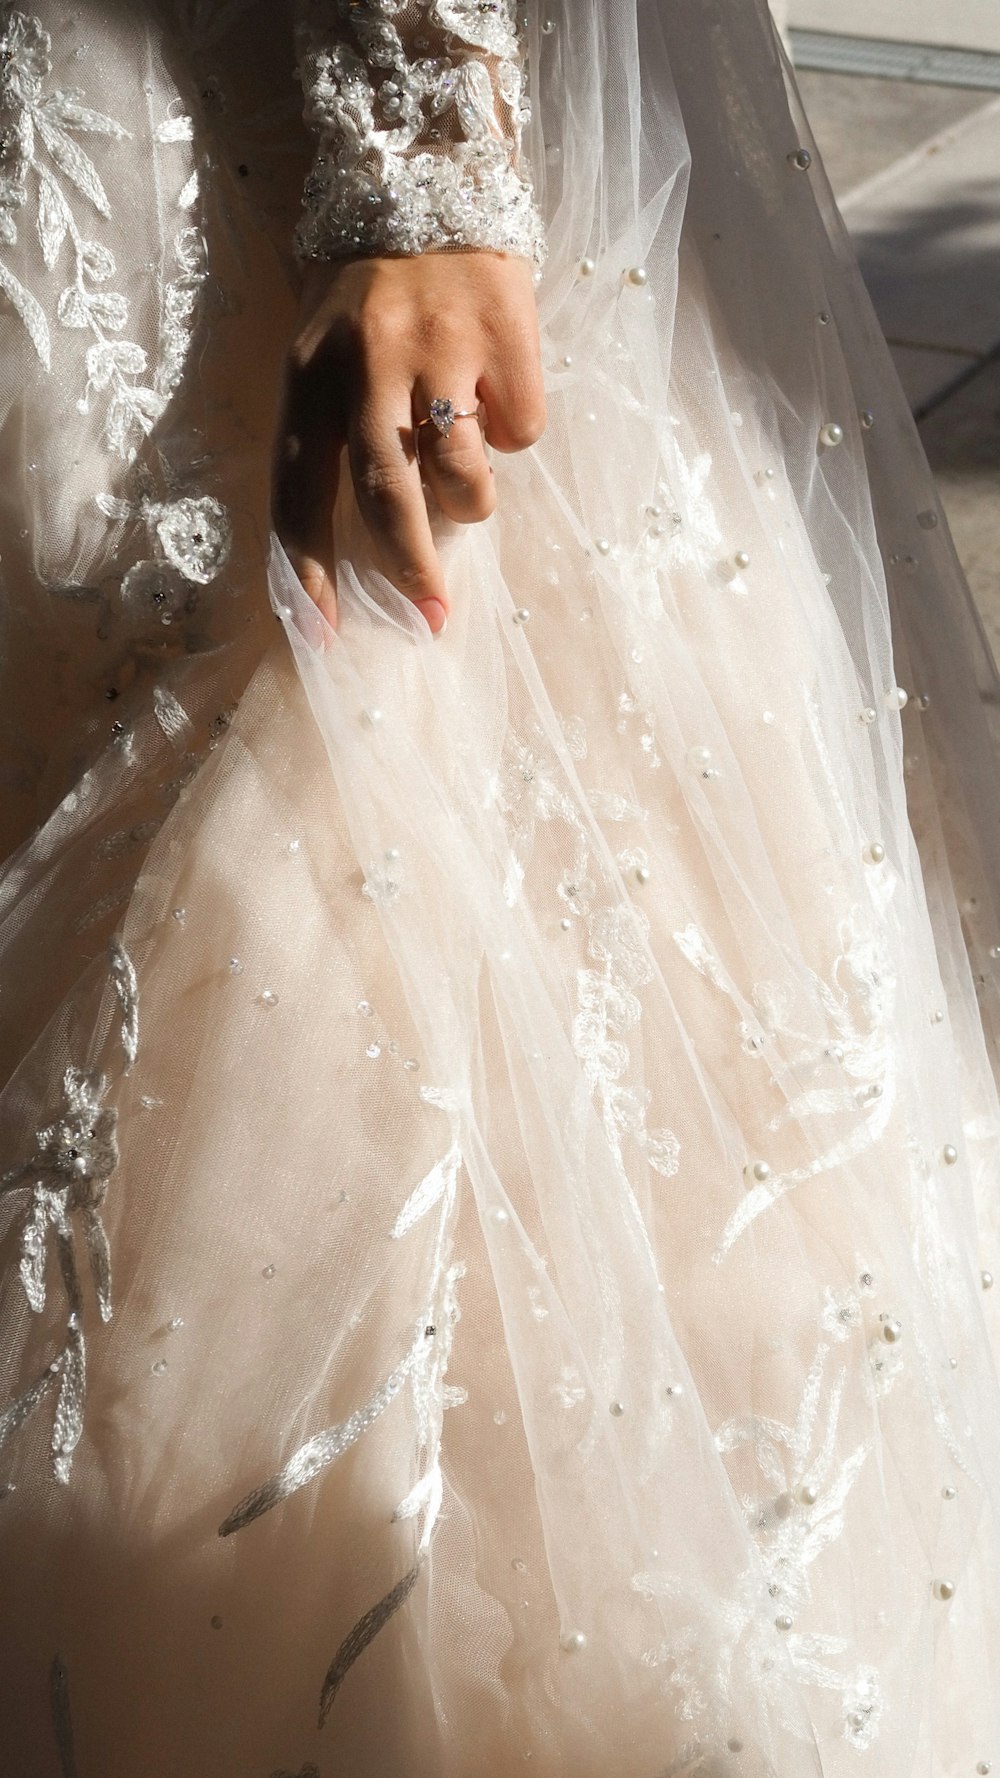 a woman in a wedding dress with a ring on her finger